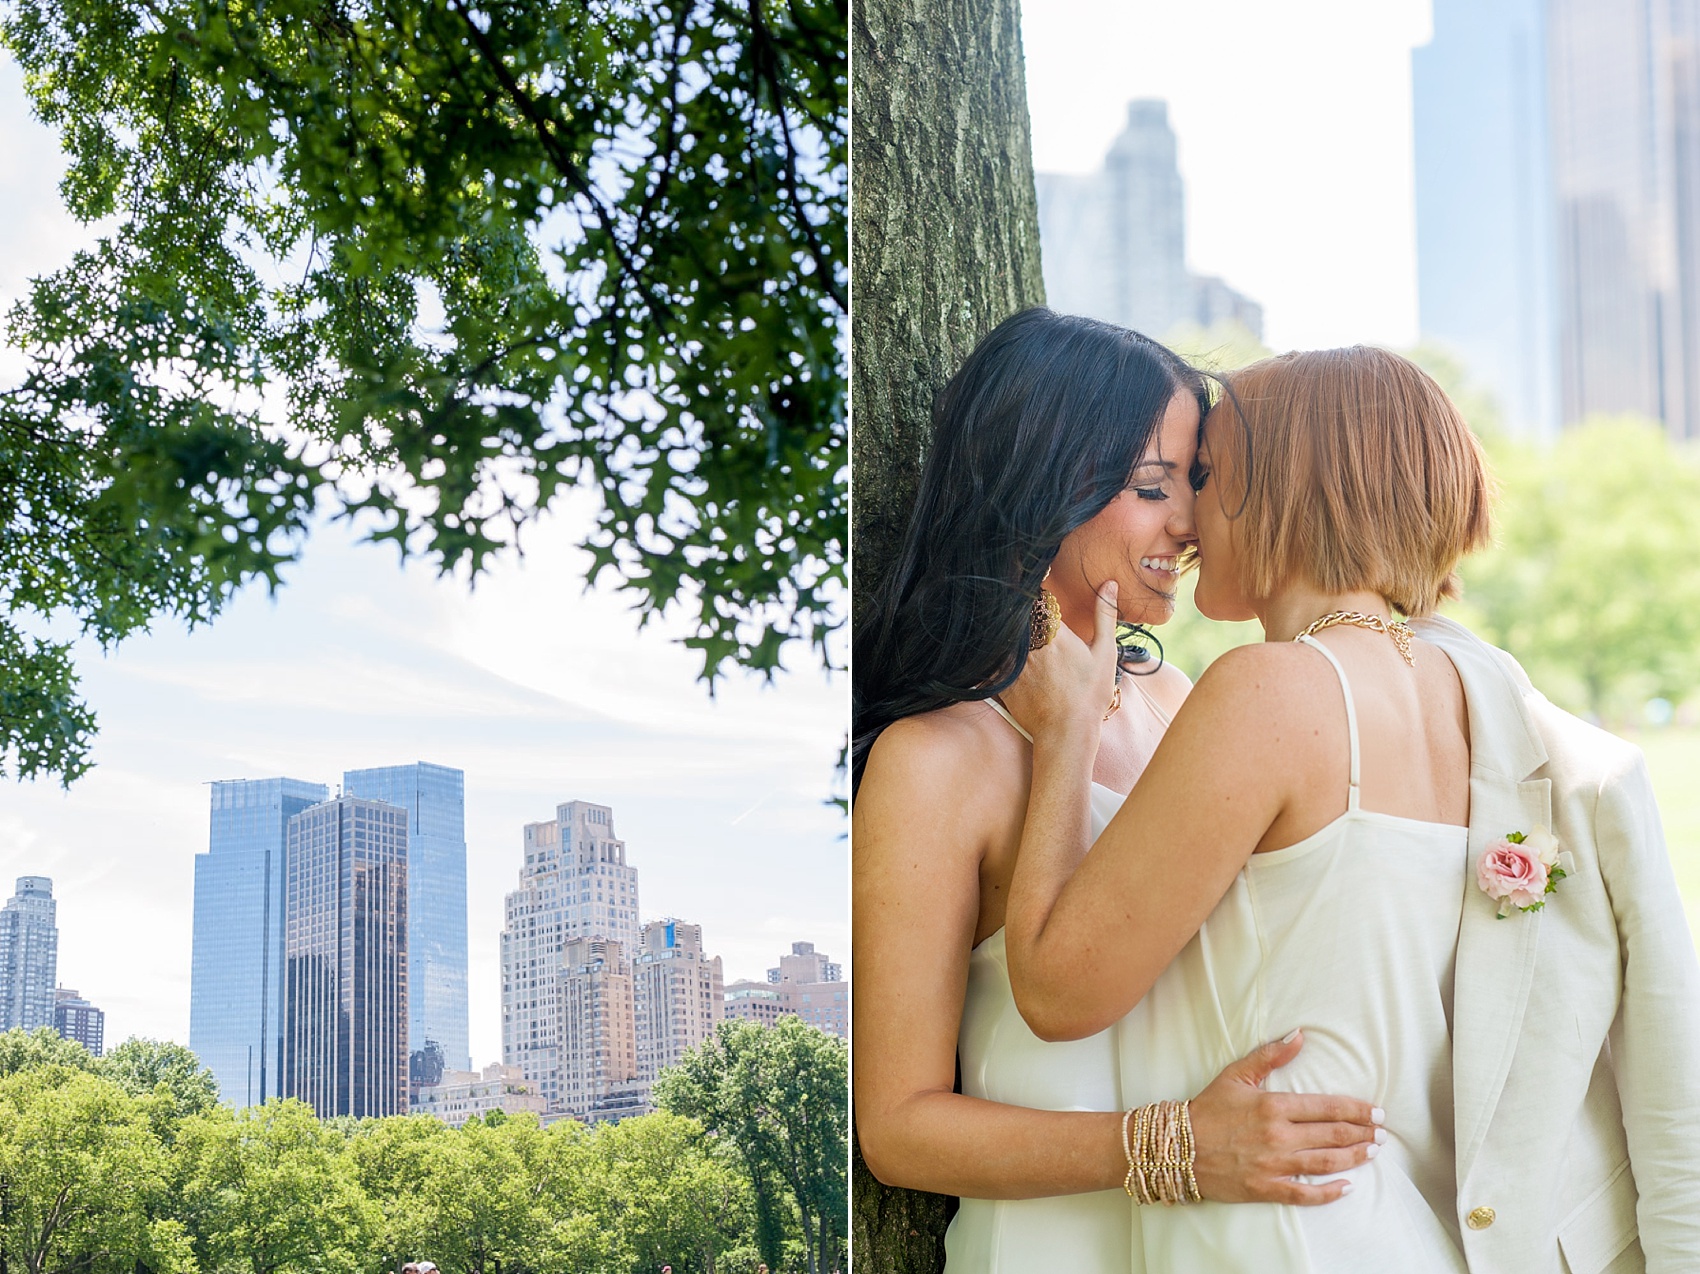 Central Park same sex elopement. Wedding photos by Mikkel Paige Photography. #nyc #centralparkelopement #samesexmarriage #equality #gayrights #equalrights #nycweddingphotographer #nycskyline